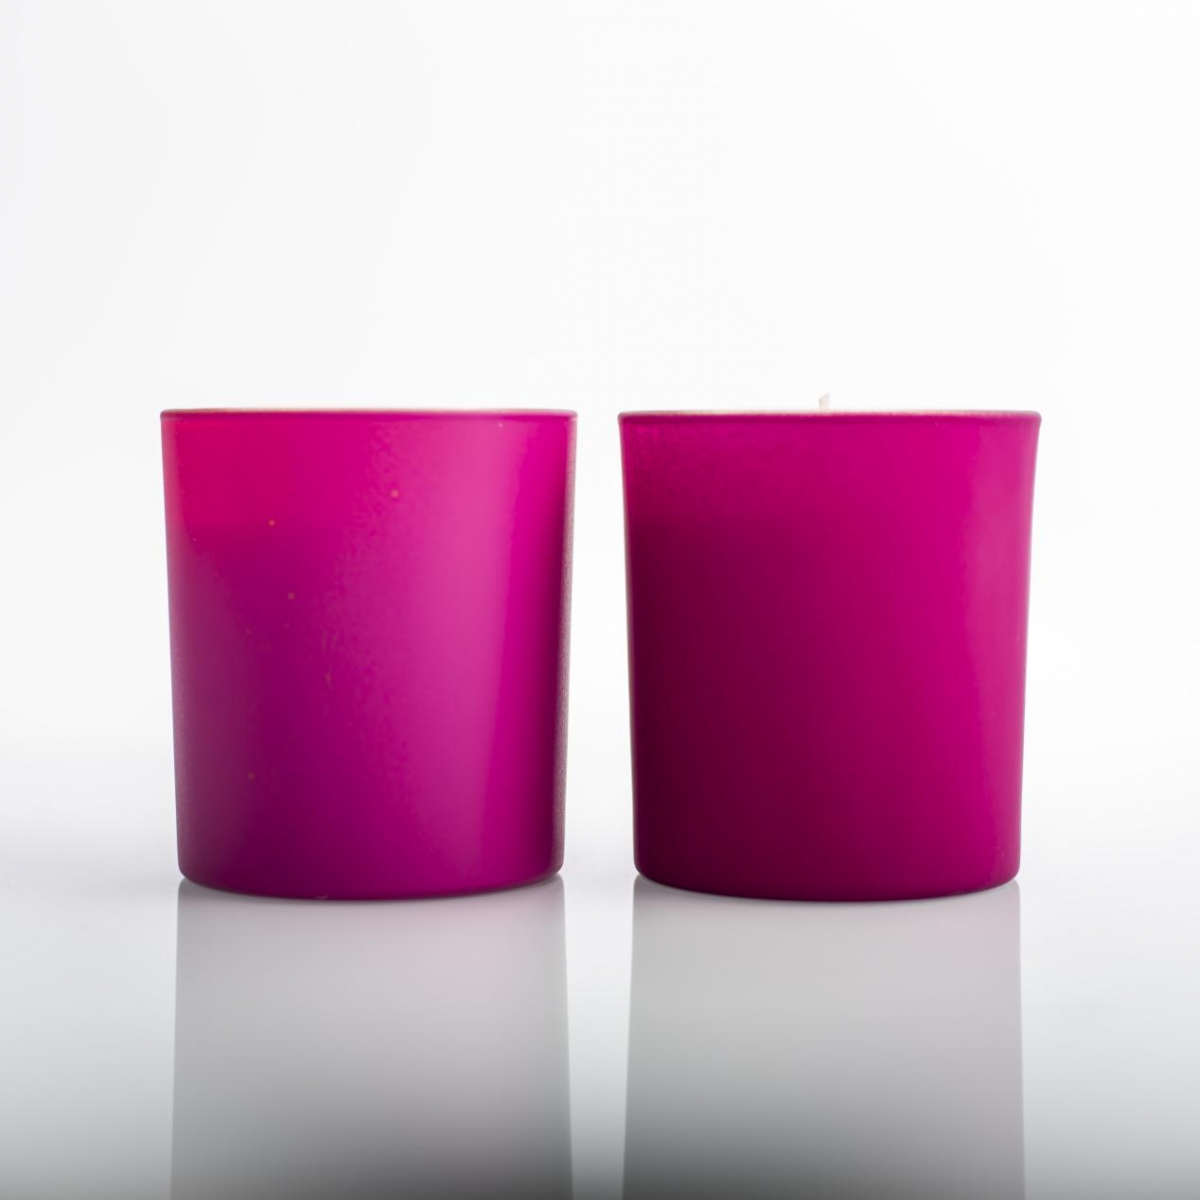 Matte Pink Scented Candles -Best Soy Wax ,White Jasmine ,Custom Candles ,China Factory Price-HOWCANDLE-Candles,Scented Candles,Aromatherapy Candles,Soy Candles,Vegan Candles,Jar Candles,Pillar Candles,Candle Gift Sets,Essential Oils,Reed Diffuser,Candle Holder,